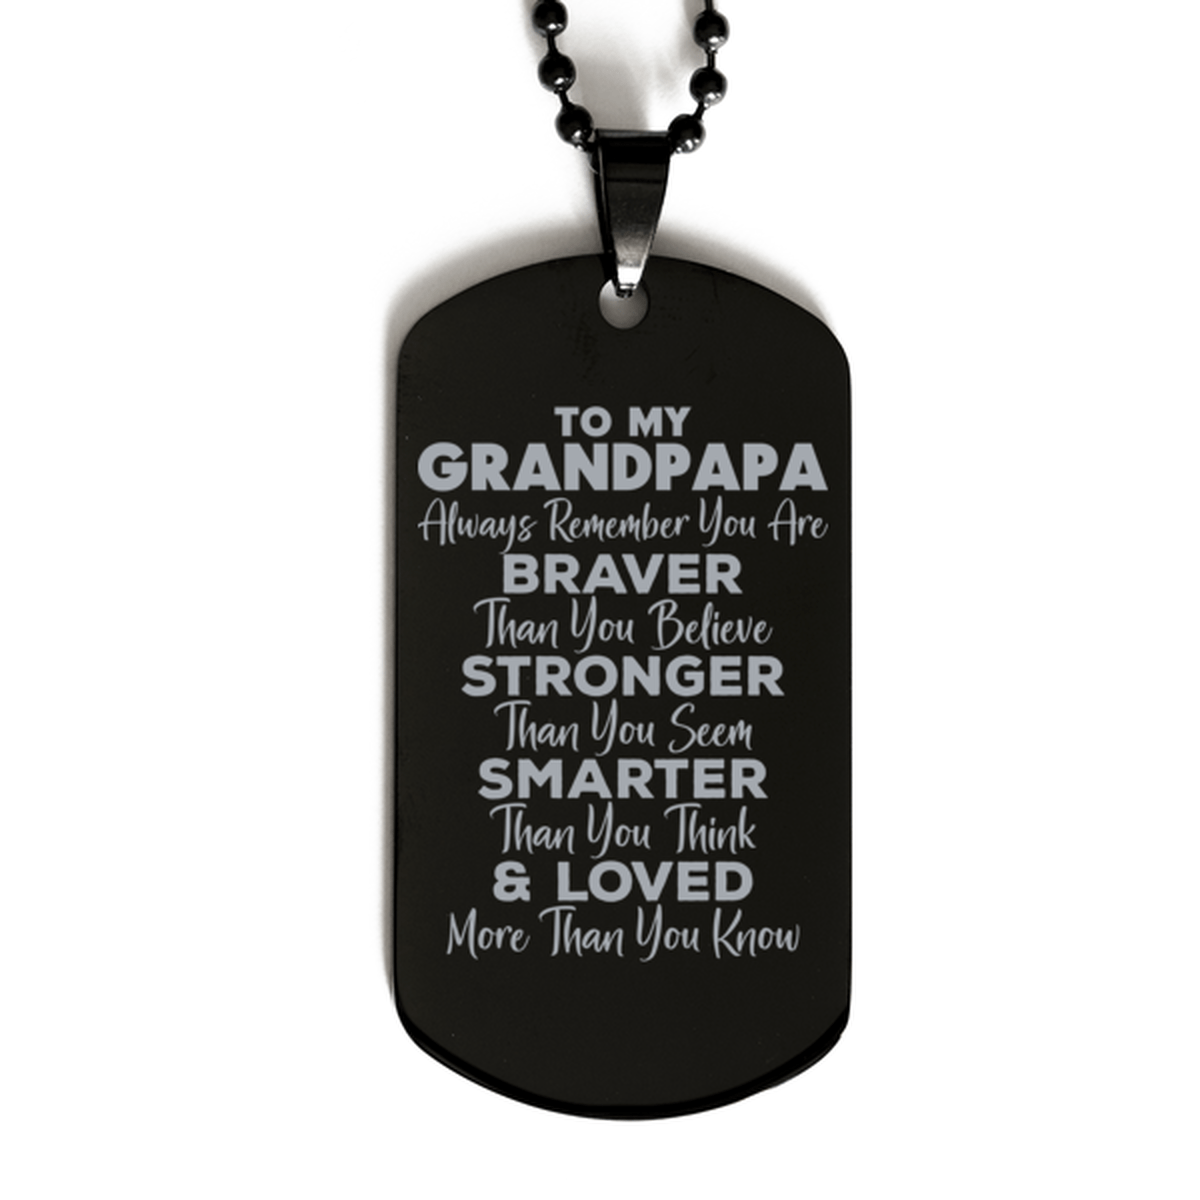 Motivational Grandpapa Black Dog Tag Necklace, Grandpapa Always Remember You Are Braver Than You Believe, Best Birthday Gifts for Grandpapa